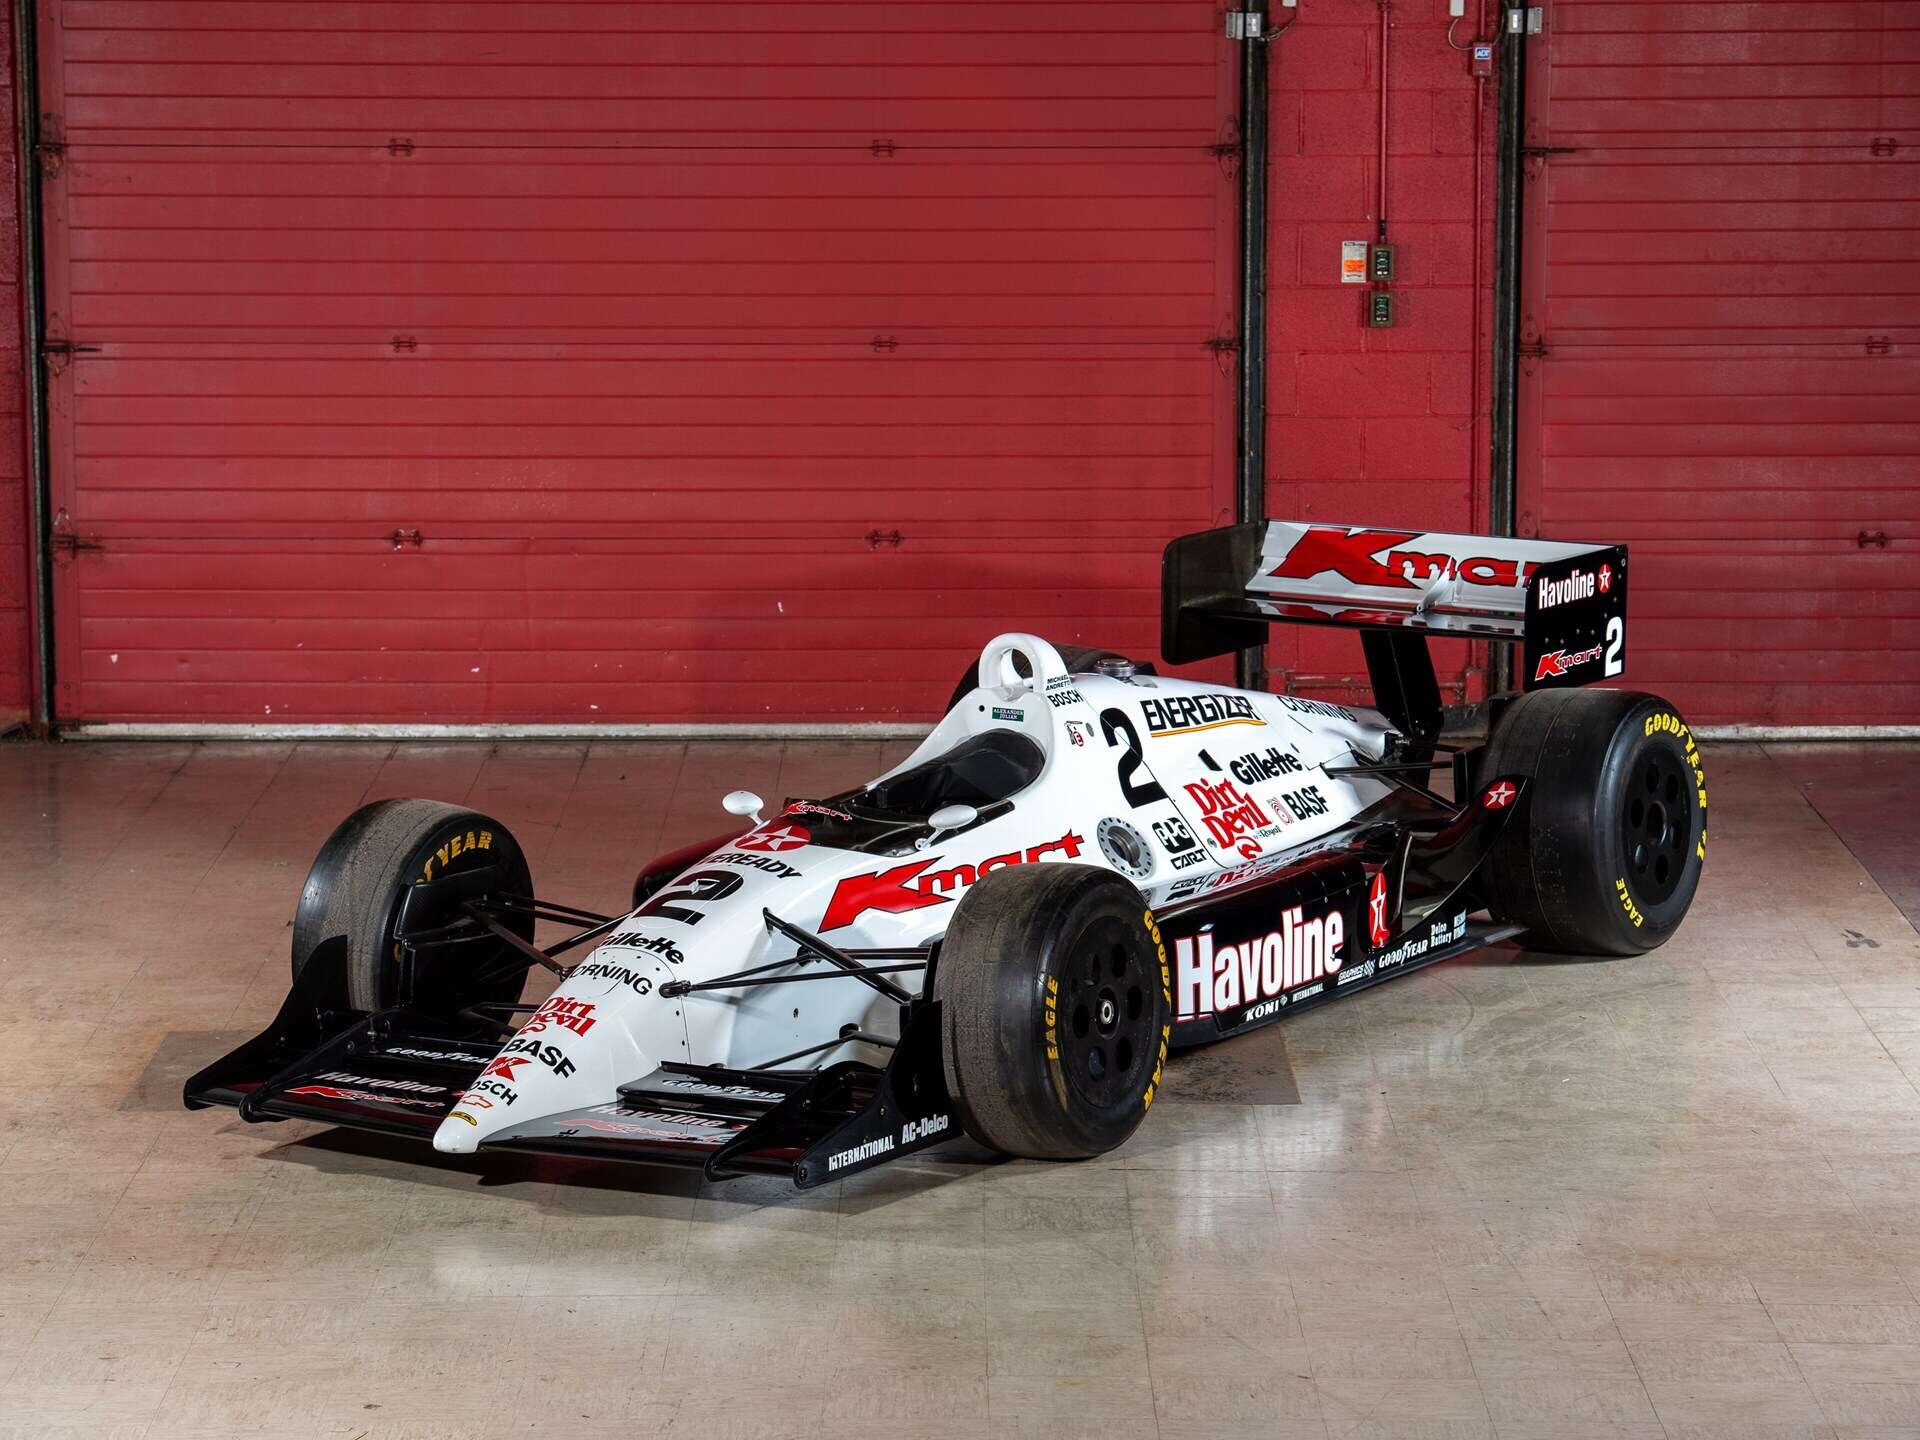 Michael Andretti’s 1991 Lola-Chevrolet T91/00 Is For Sale